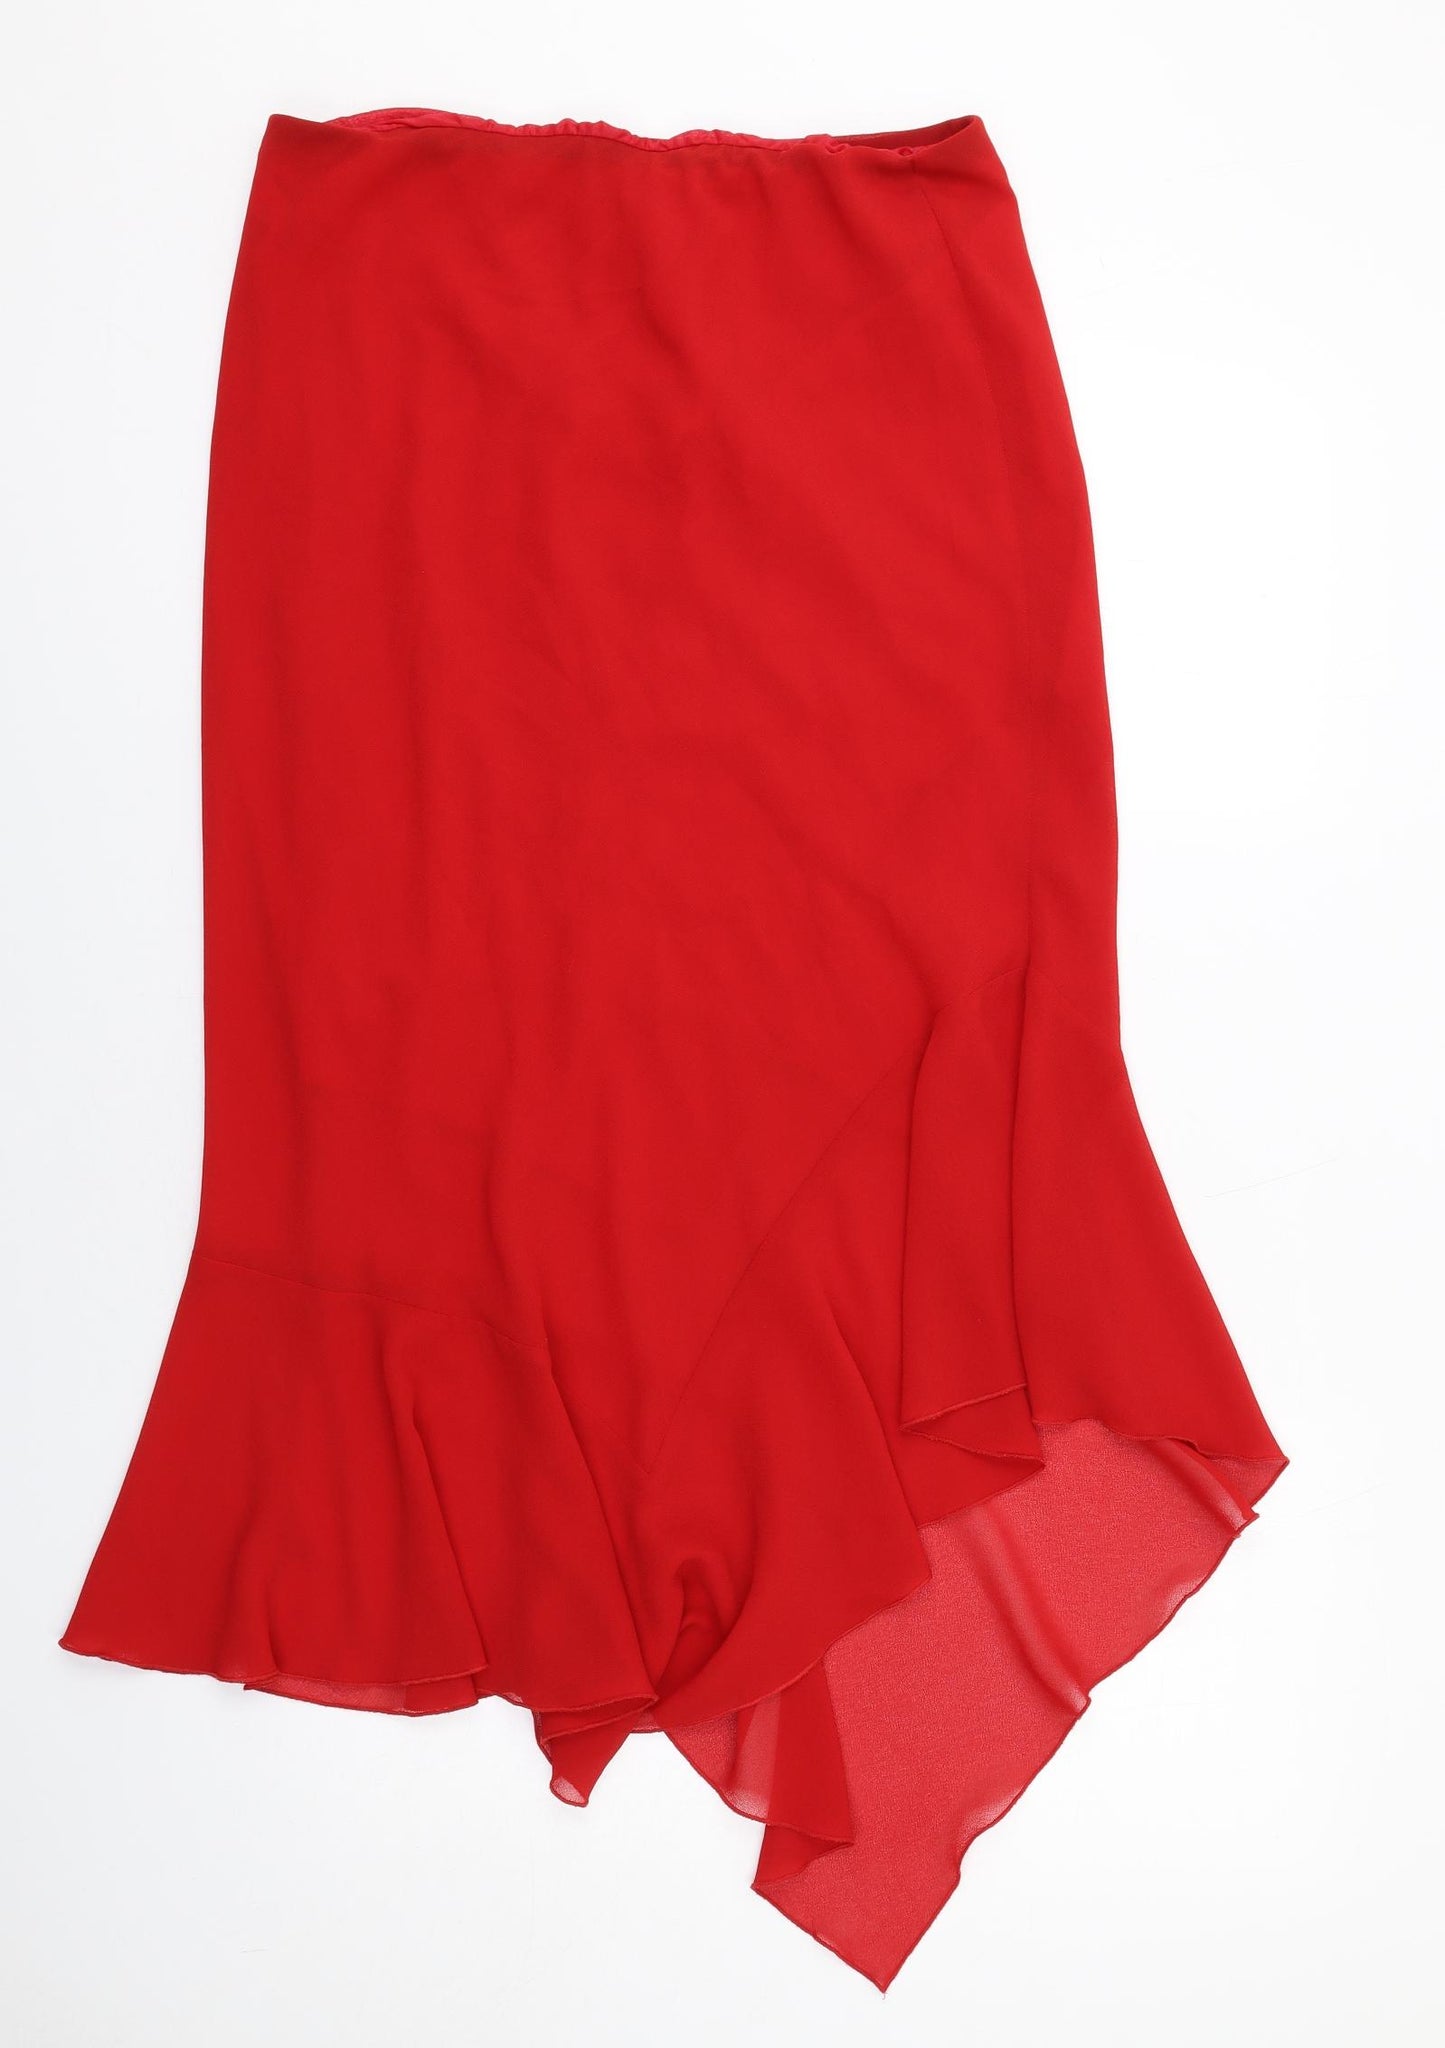 Just Elegance Womens Red Polyester Swing Skirt Size 16